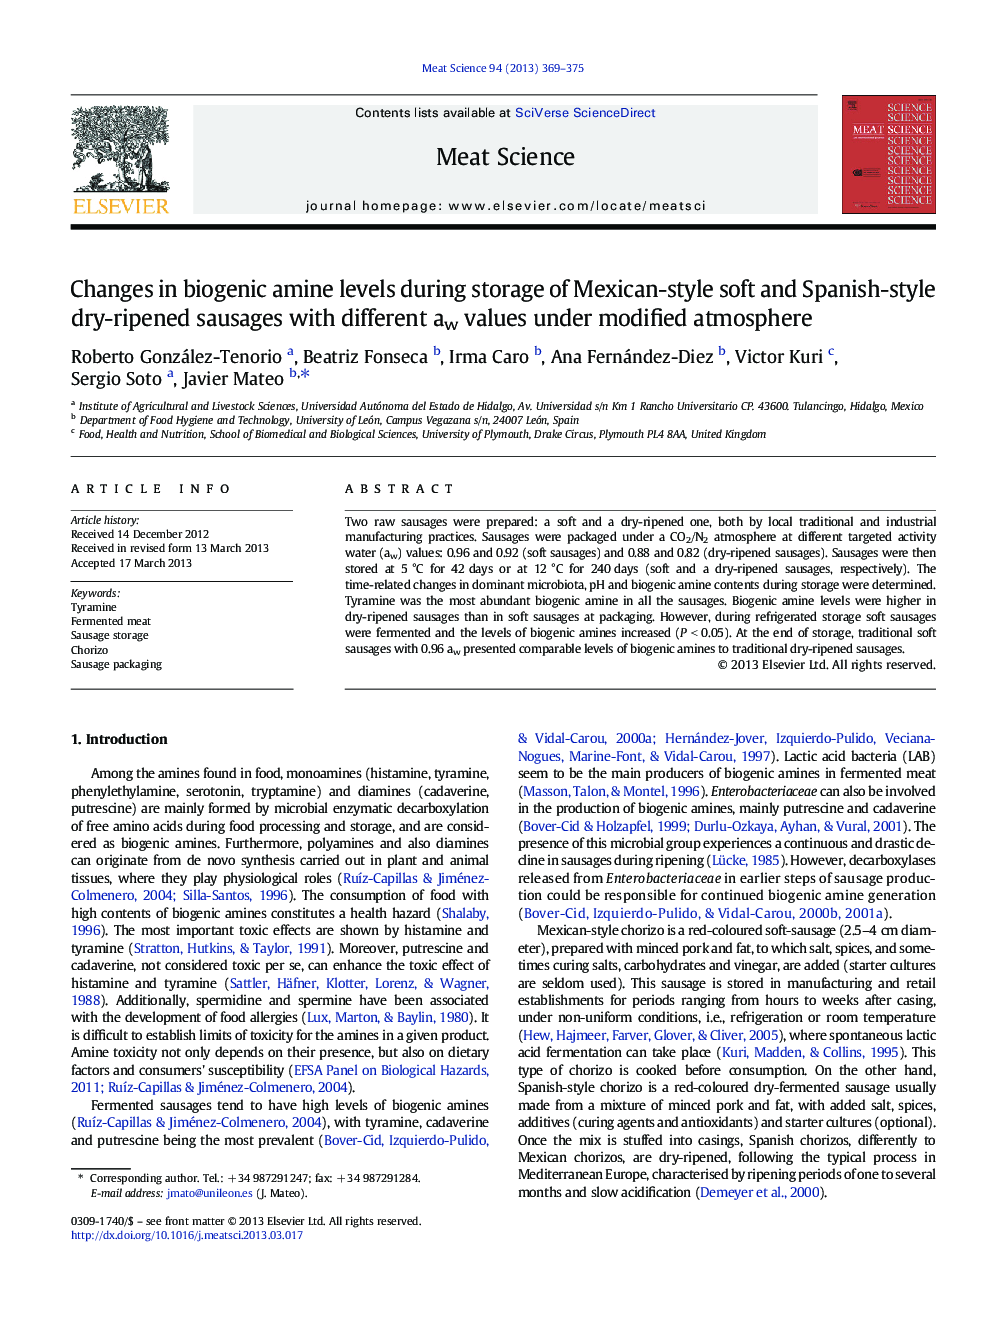 Changes in biogenic amine levels during storage of Mexican-style soft and Spanish-style dry-ripened sausages with different aw values under modified atmosphere